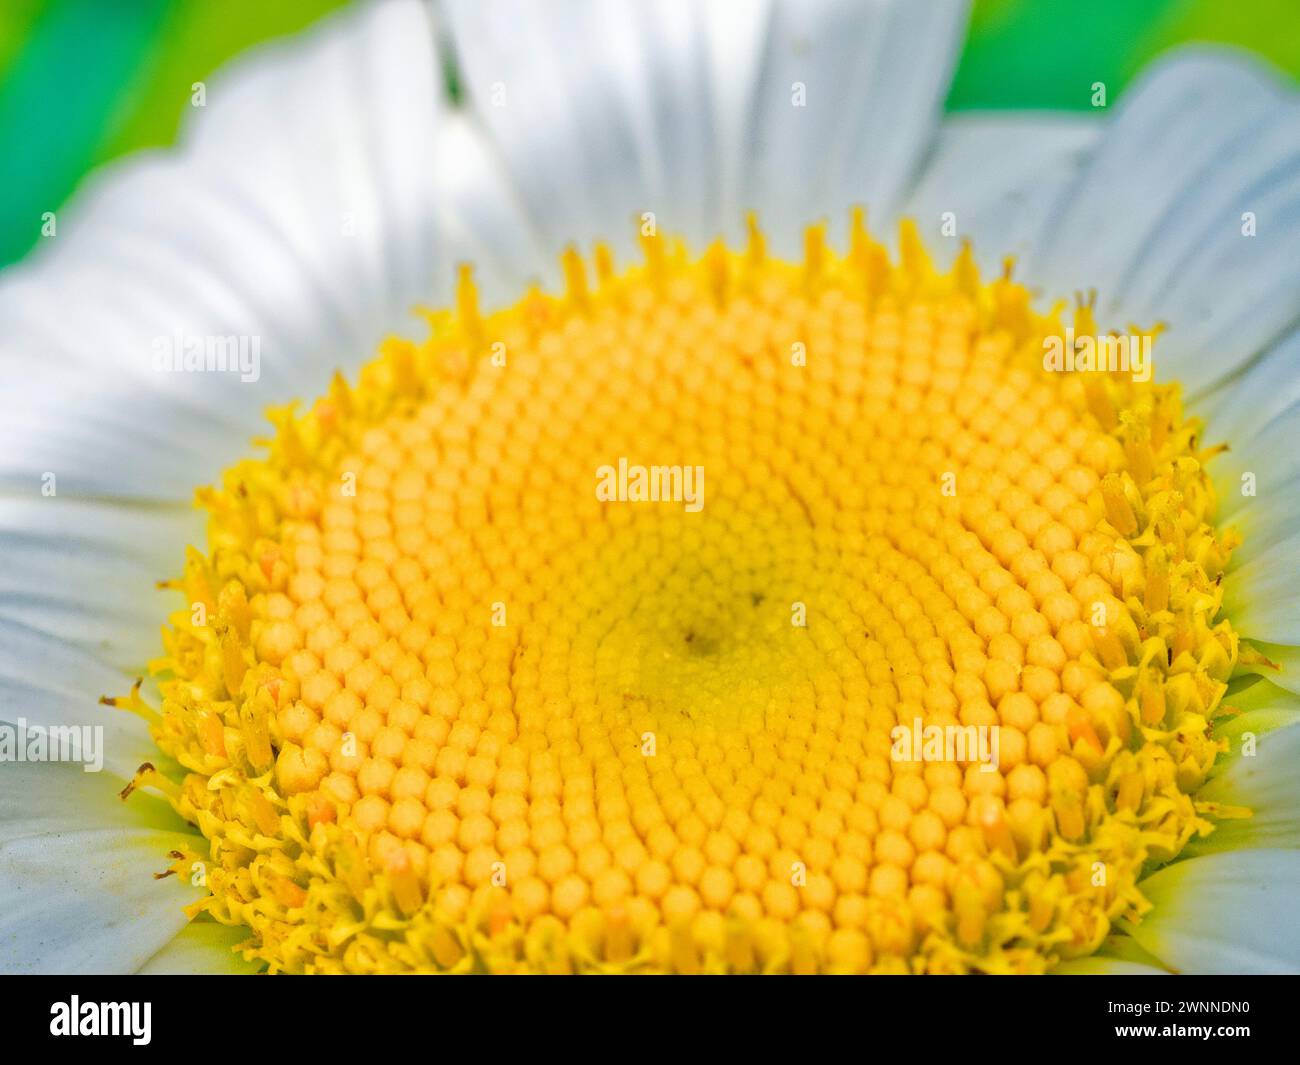 White petals surround a detailed, textured yellow core of a daisy flower against a dark backdrop. Stock Photo